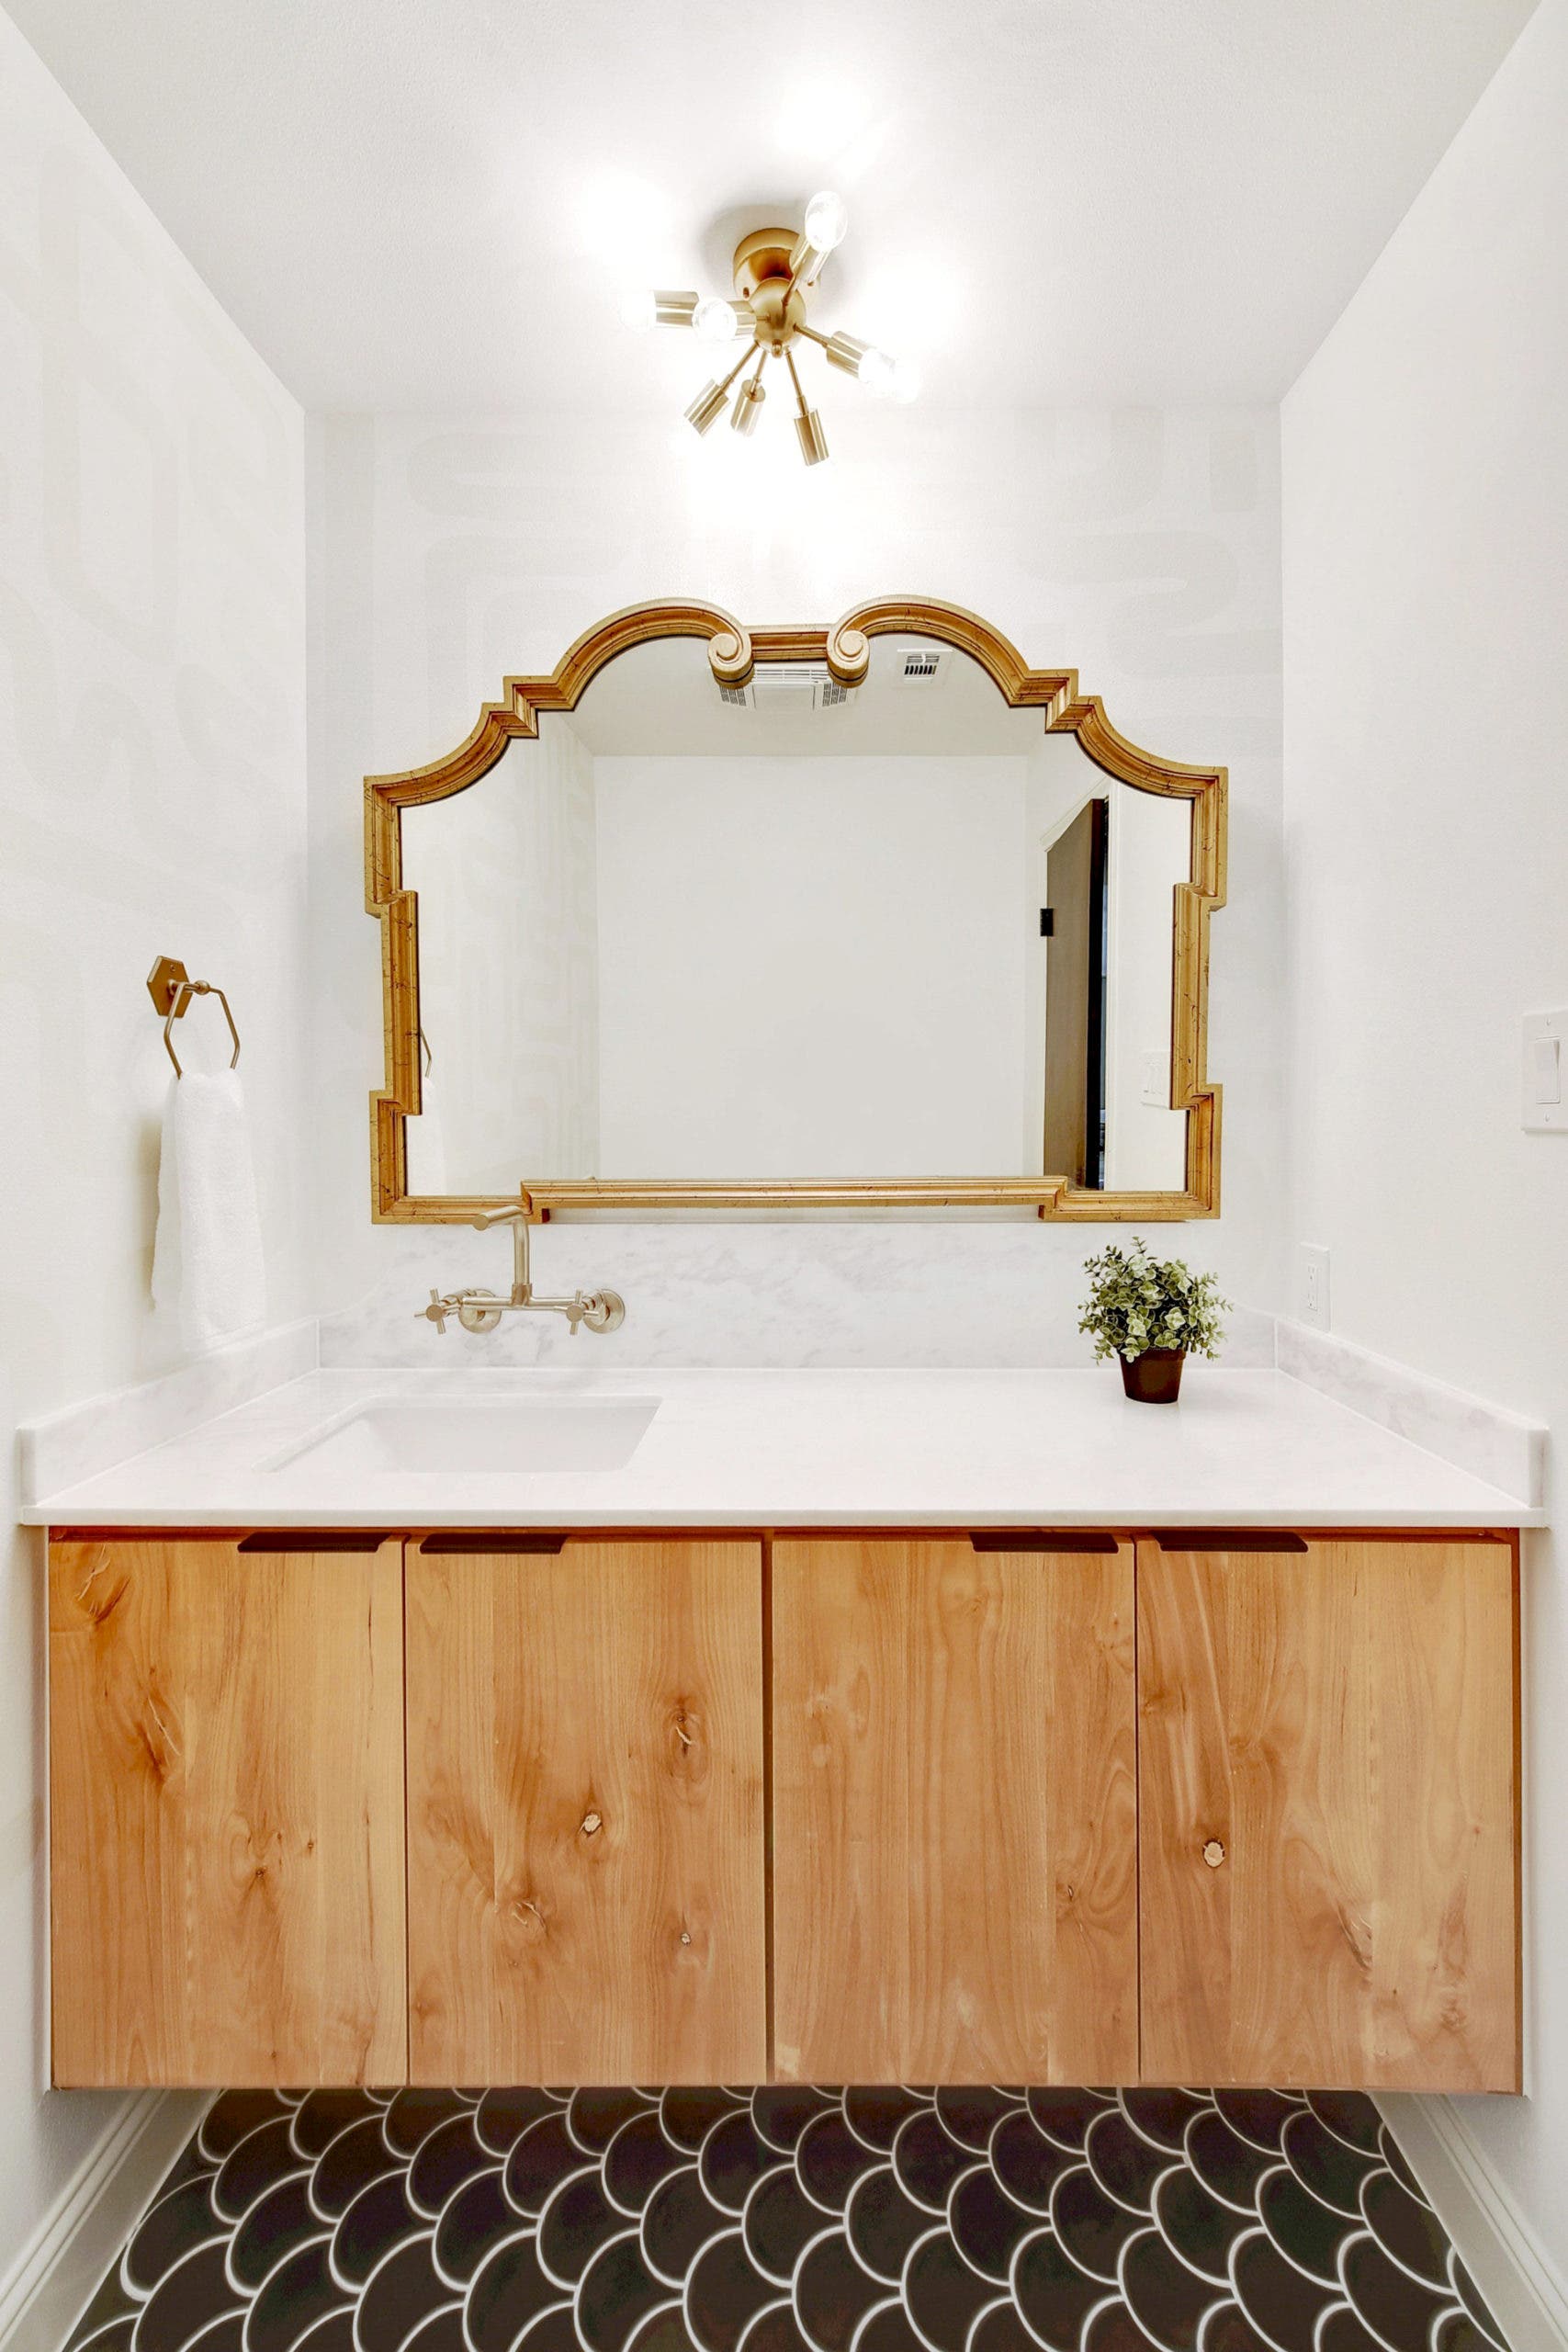 How Lighting Fixtures Enhance the Finishes in the Bathroom